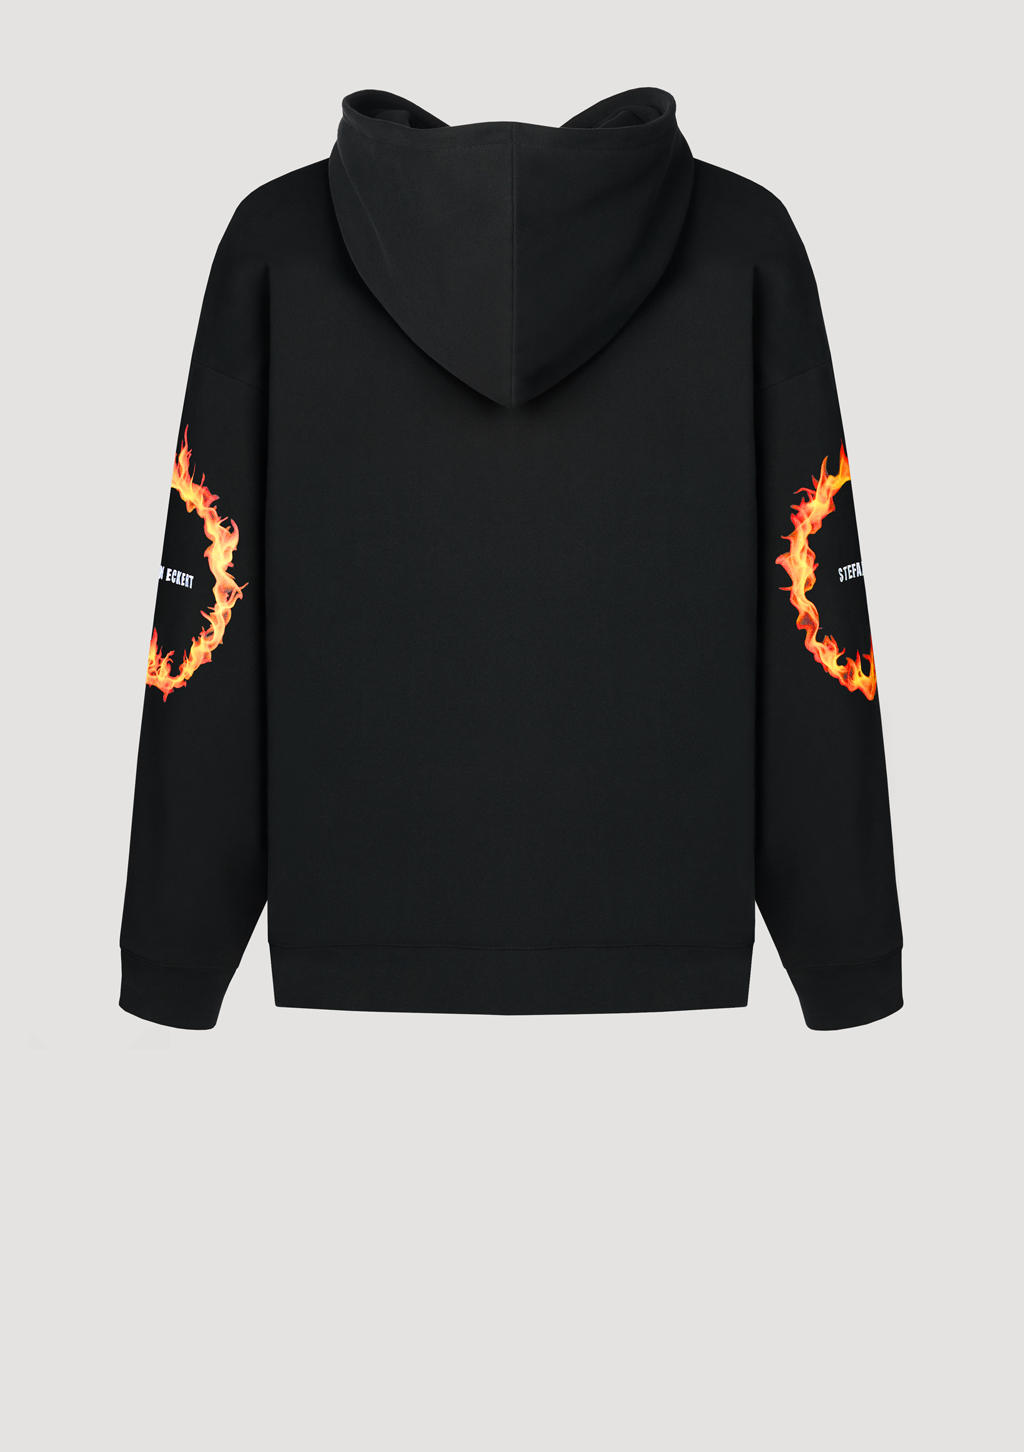 Designer Hoodie by Stefan Eckert, made of high quality organic cotton, color black, with ring of fire digital print and embroidery. For women. Available in two sizes.